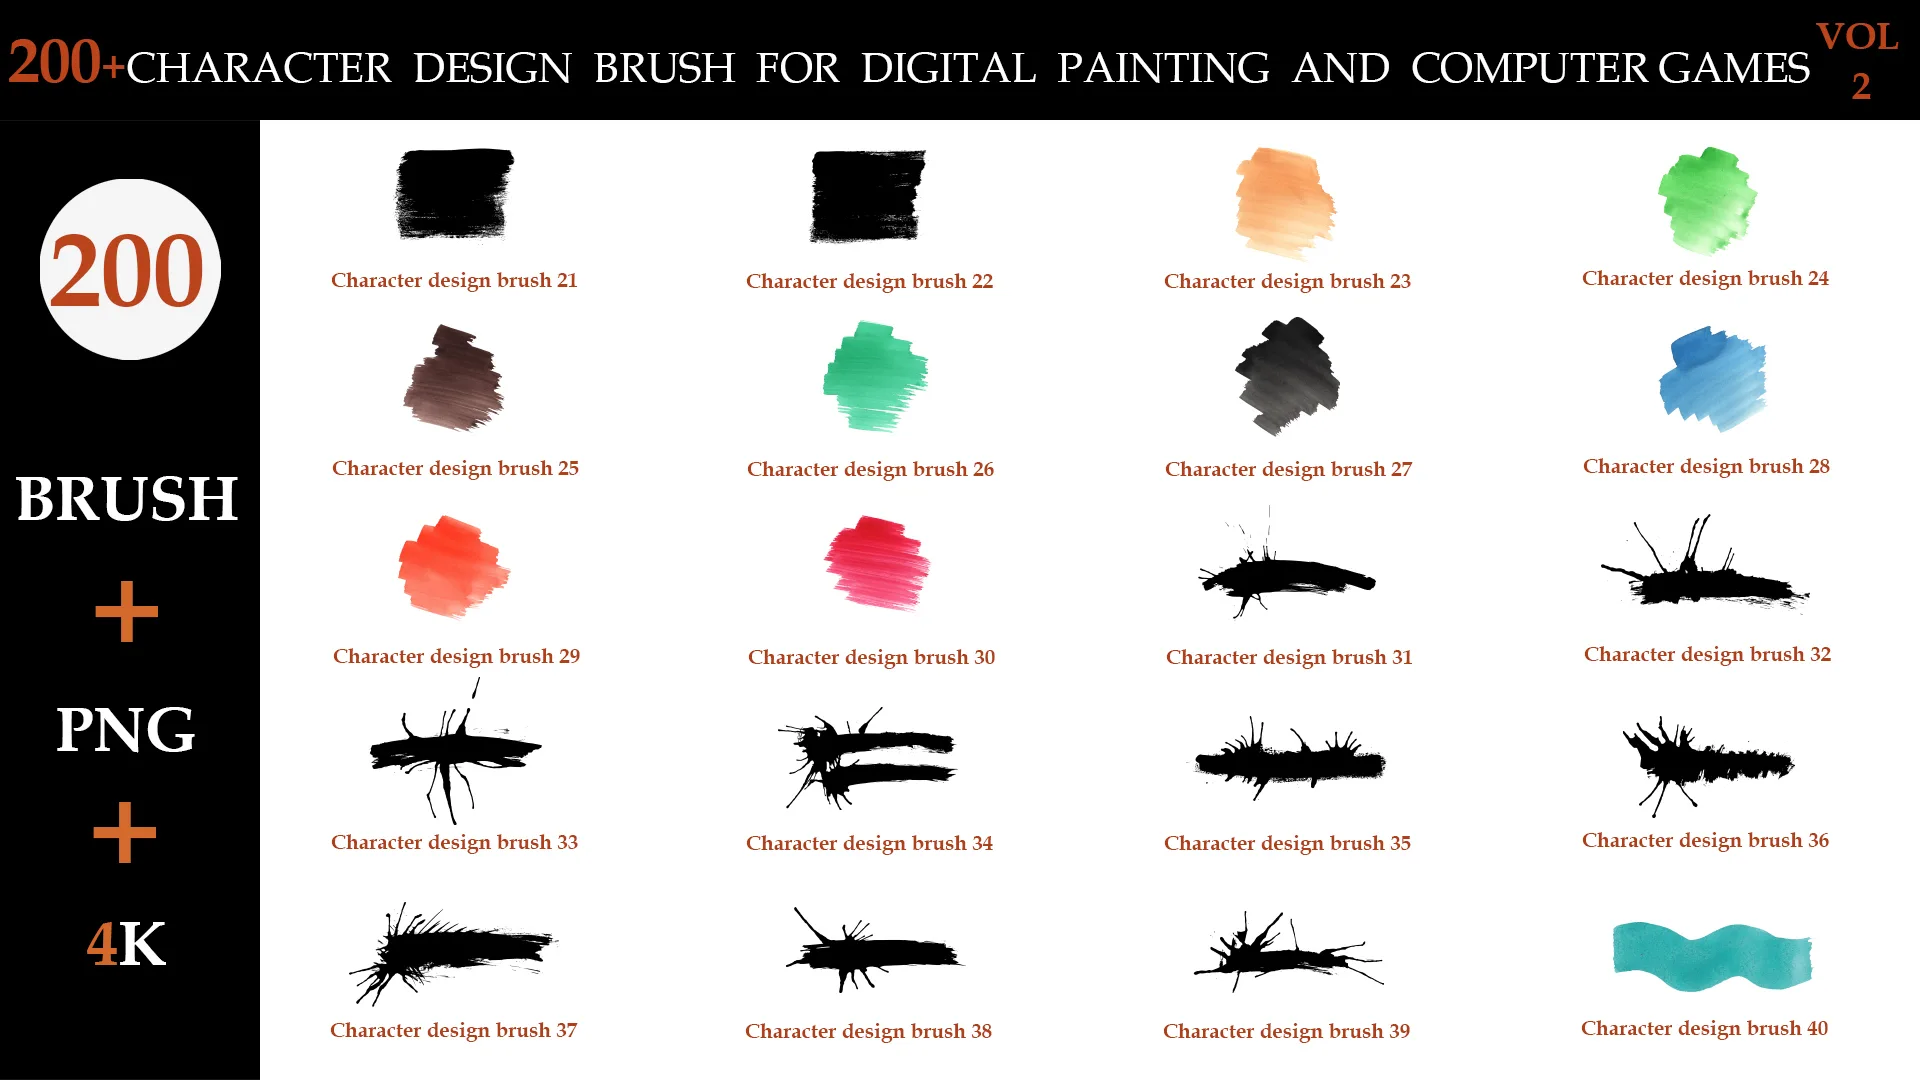 200+CHARACTER DESIGN BRUSH FOR DIGITAL PAINTING AND COMPUTER GAMES VOL:2